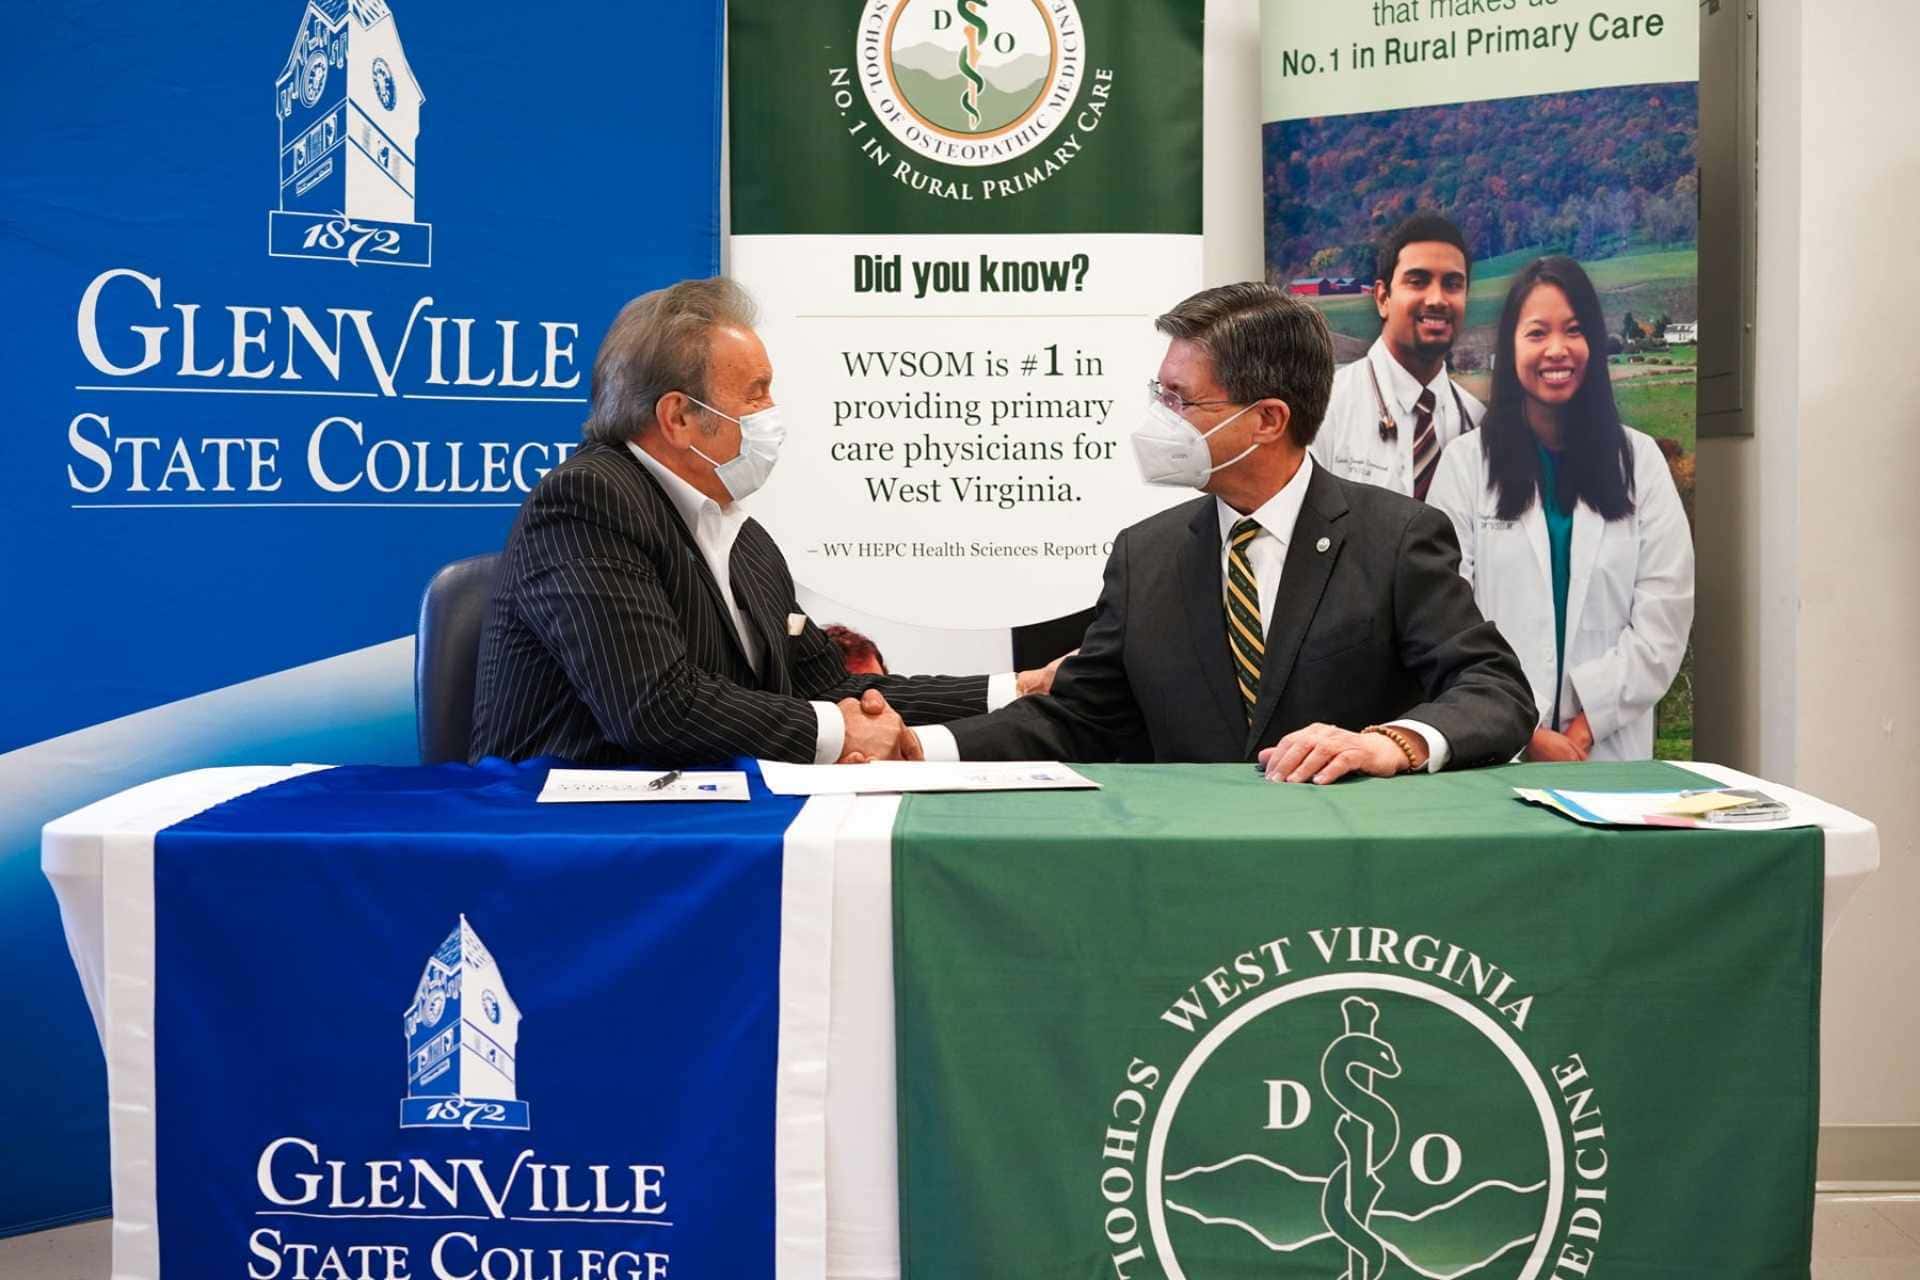 Glenville State University President Dr. Mark A. Manchin (left) and West Virginia School of Osteopathic Medicine President James W. Nemitz, Ph.D. shake hands following a recent signing ceremony welcoming Glenville State into the WVSOM Pre-Osteopathic Medicine Program.